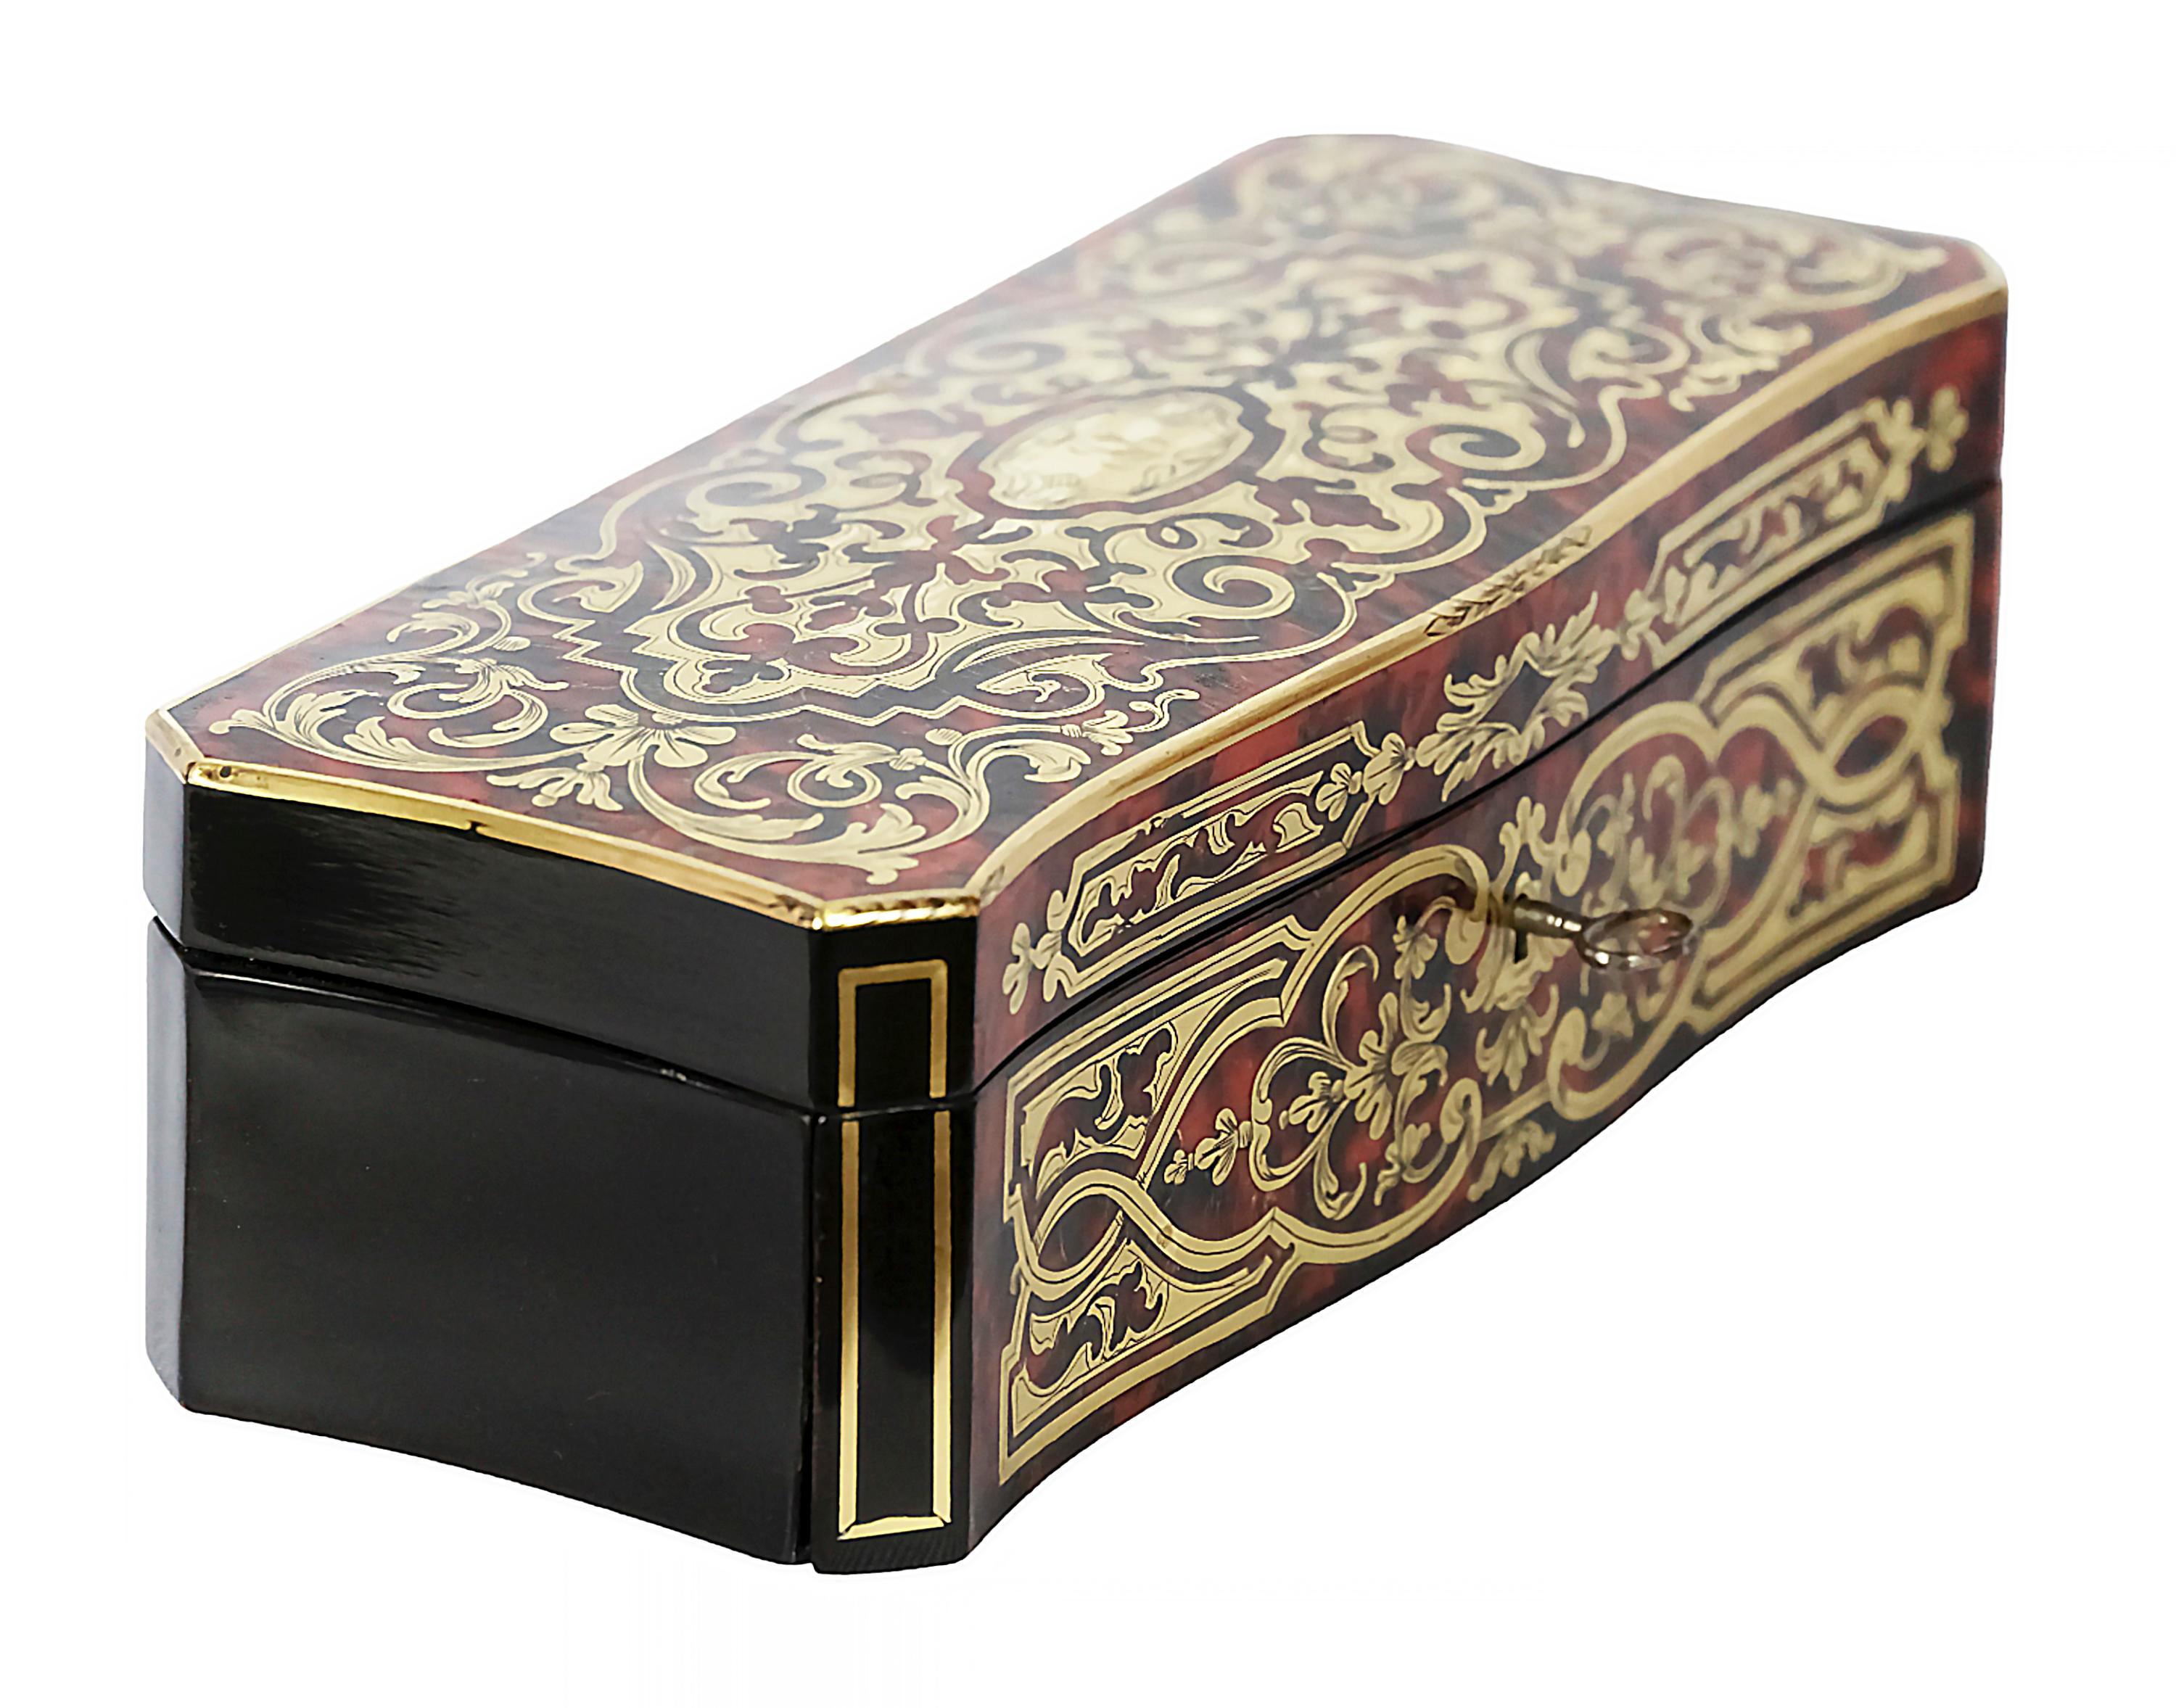 Antique 19th century French boulle marquetry box.
The wooden box is decorated with inlaid brass and tortoiseshell.
Including key.
After high quality renovation.
Very good/excellent antique condition.

 